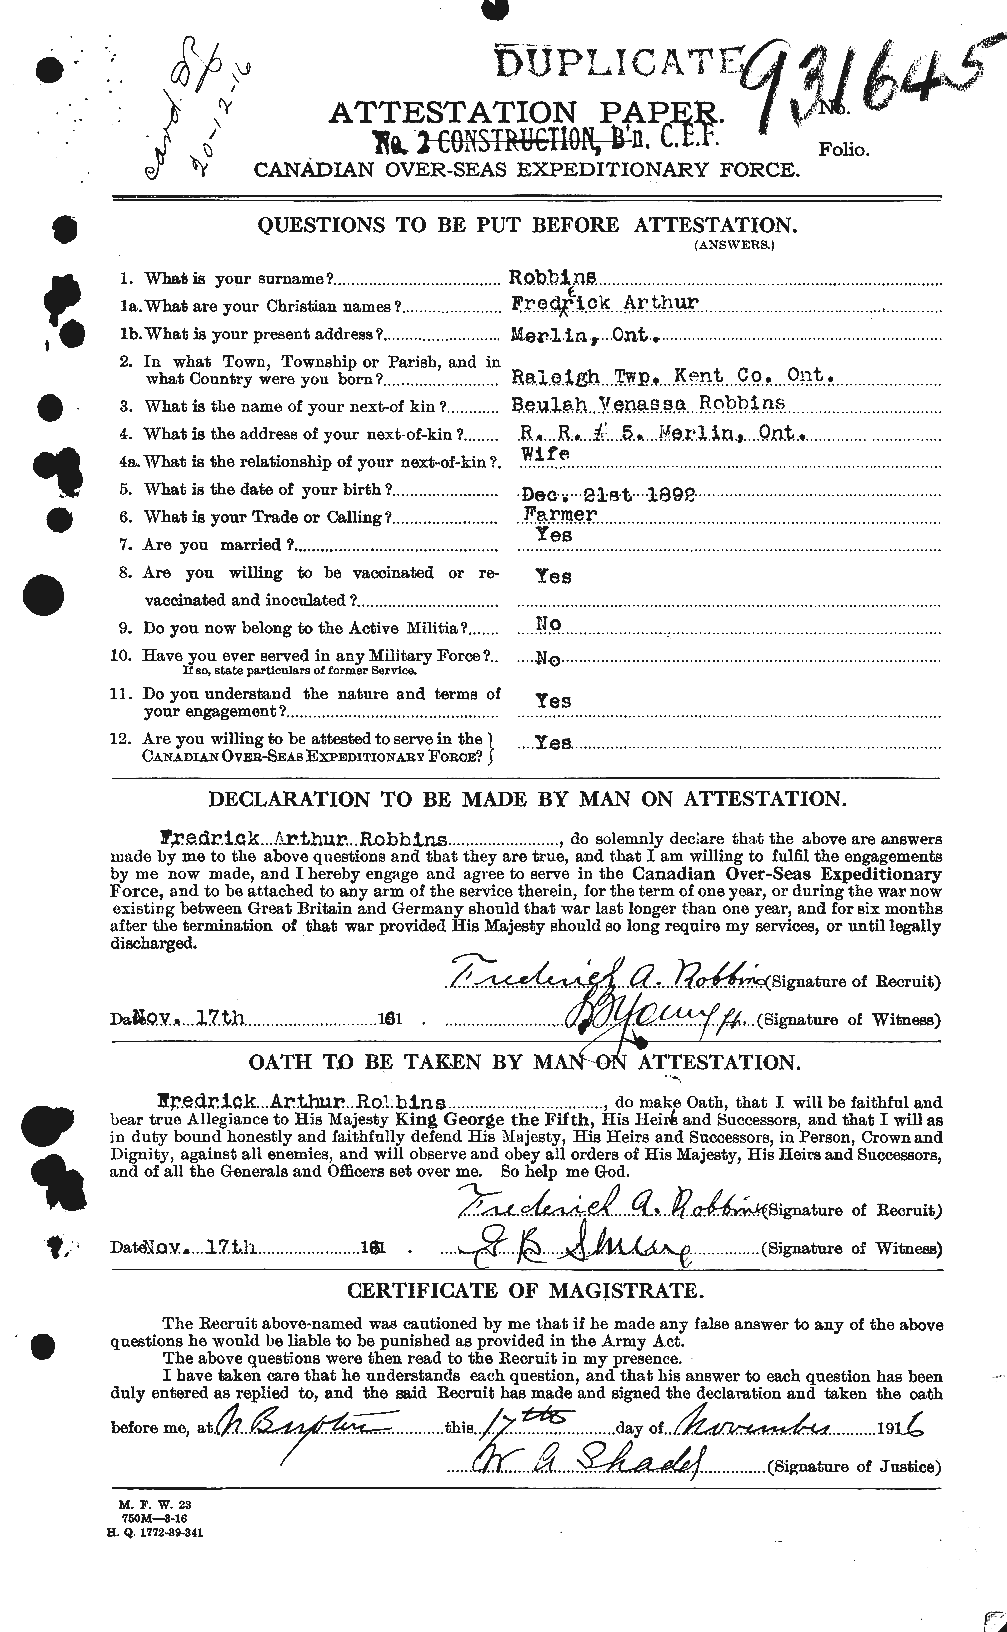 Personnel Records of the First World War - CEF 603789a